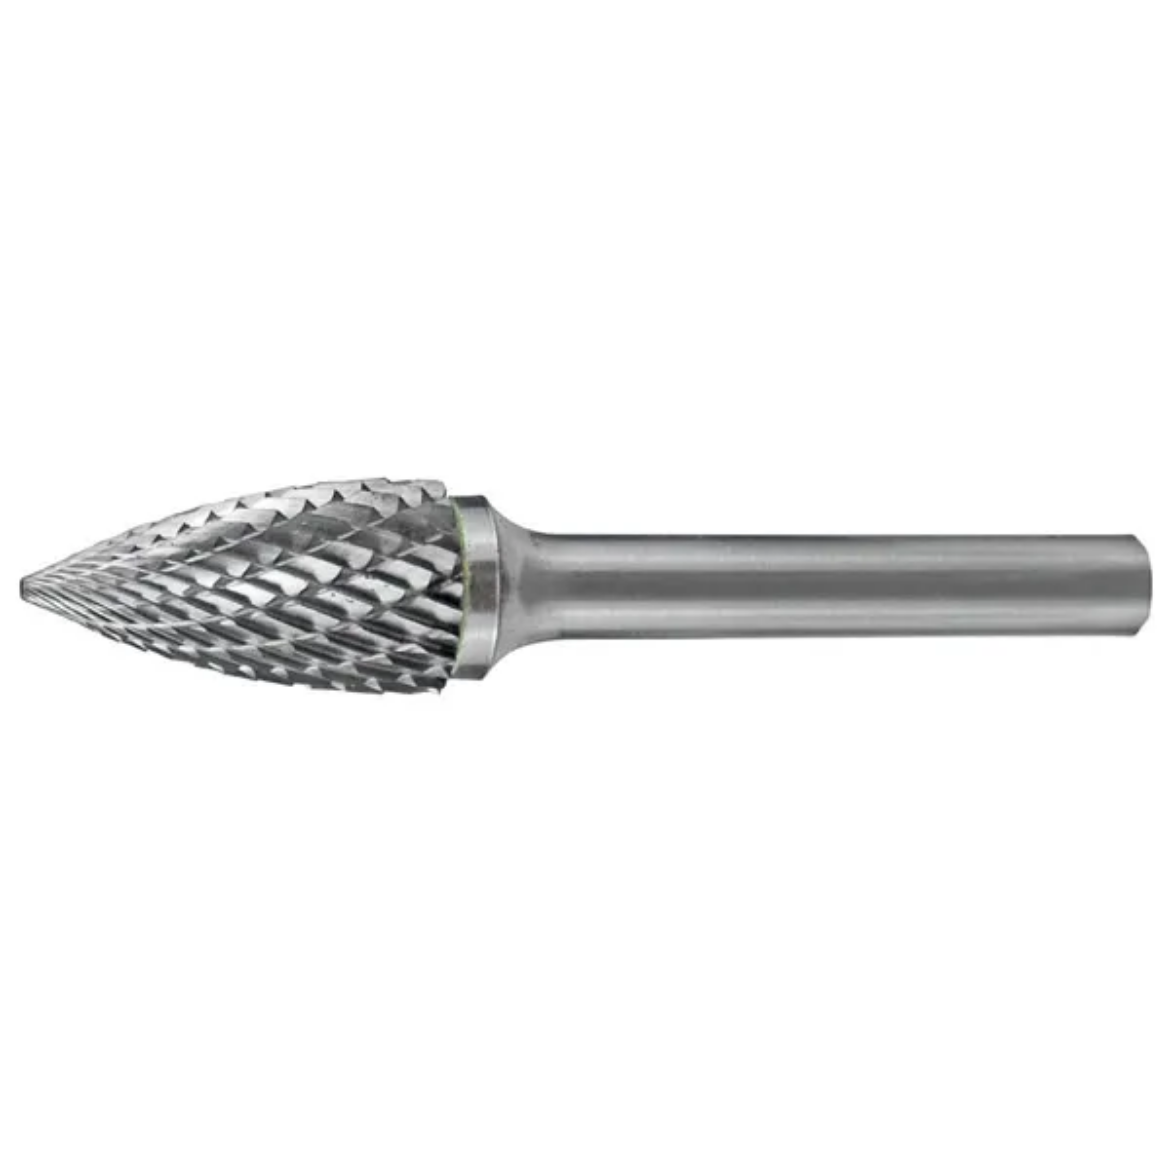 Picture of HOLEMAKER CARBIDE BURR, TREE SHAPE POINTED END 1/2" X 1" HEAD, 1/4" SHANK DC